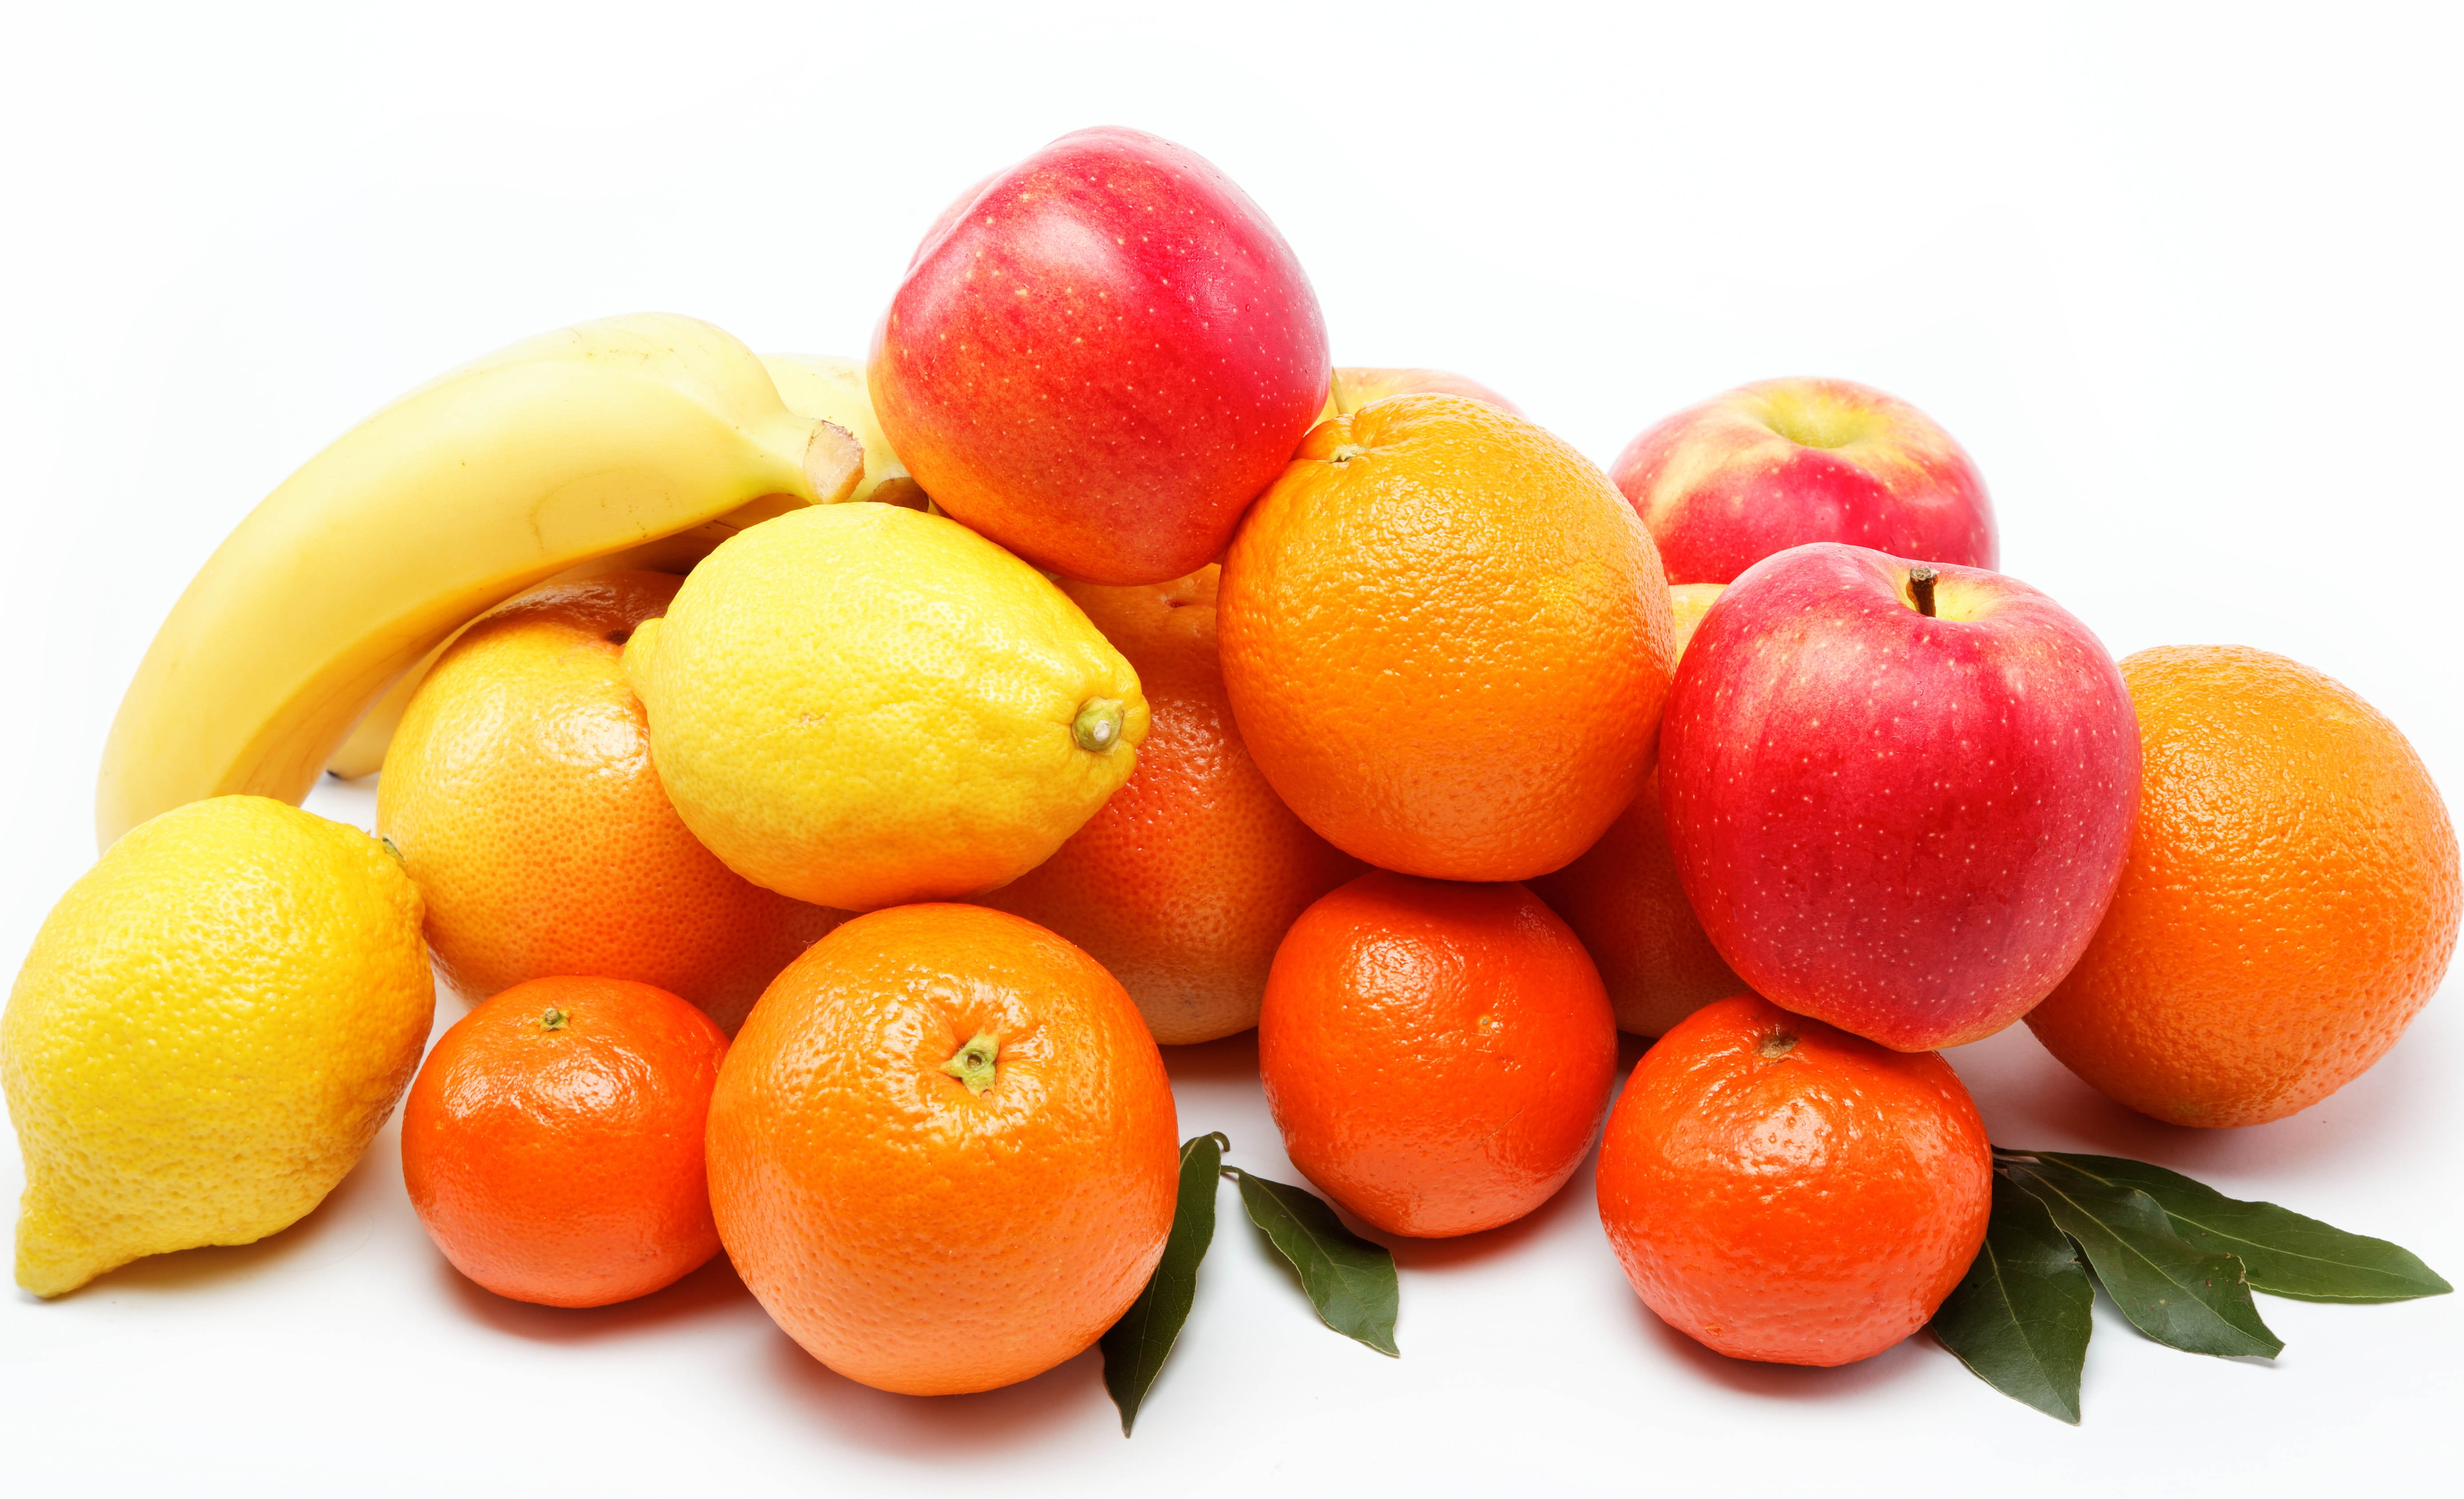 Red Apples Orange Fruits And Limes With Bananas Hd Wallpaper